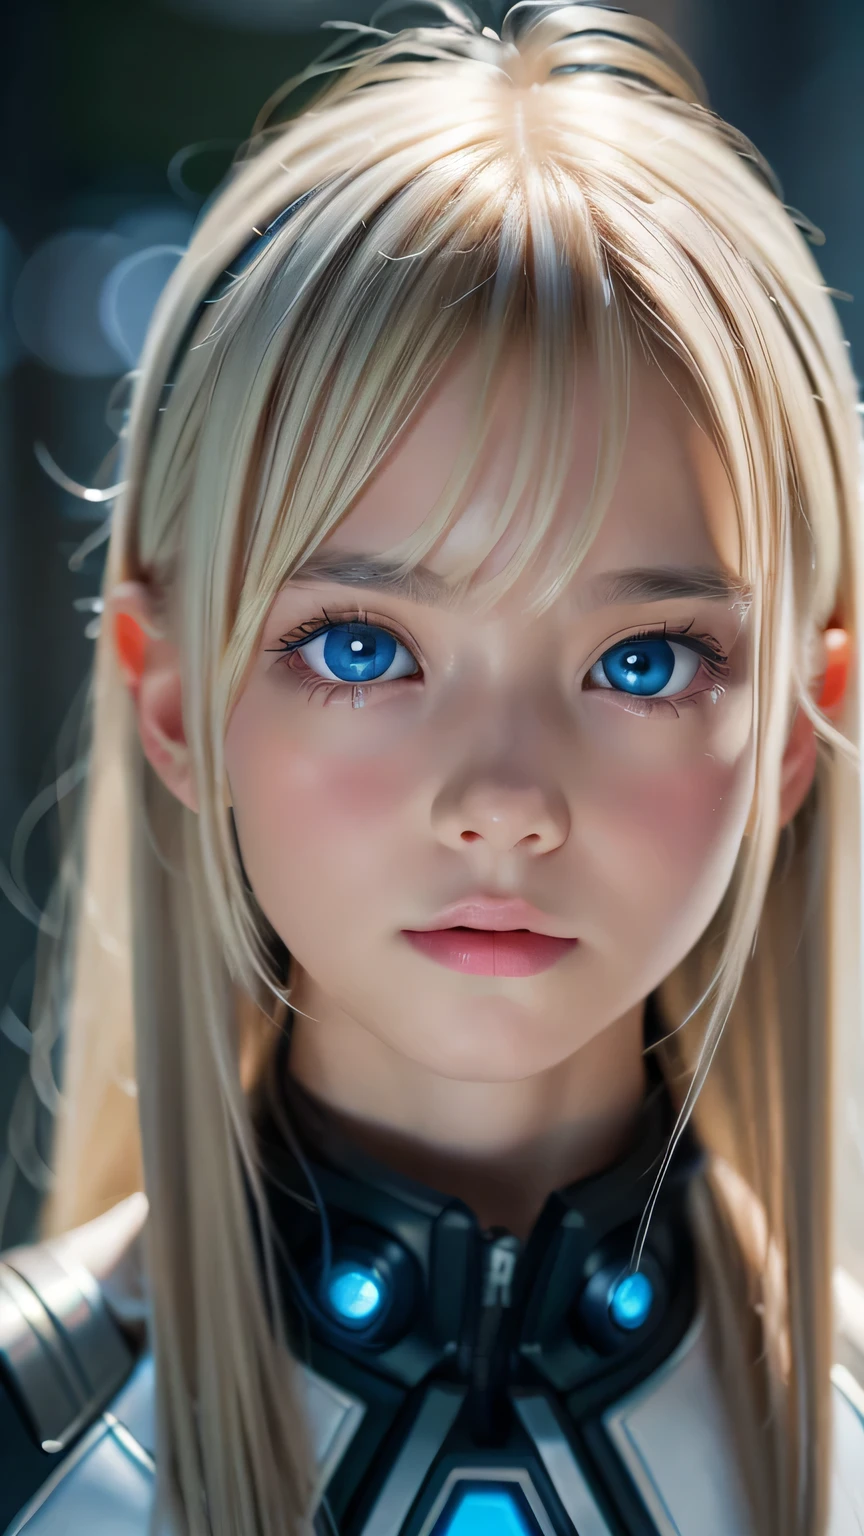 highest quality、8k Masterpiece、Ultra-high resolution、(Realistic:1.3)、RAW Photos、14 year old Scandinavian girl with shiny blonde hair、Silvery blonde hair、Super long straight hair、目とBangs between the eyes、bangs on the face、Bangs that cover the eyes、片Bangs that cover the eyes、Bangs between the eyes、White and glowing skin、1. Cyberpunk Super Beautiful Soldier、((Ultra-Realistic Details))、Portraiture、Global Illumination、Shadow Realm、Octane Rendering、8k、Ultra Sharp、Metal、Cool colors、、Very intricate detail、Realistic Light、Trends of the CG Association、so beautiful, Big bright blue eyes、Very big eyes、Eyes shining at the camera、Neon Details、Small Face Beauty、Round face、Cheek highlight